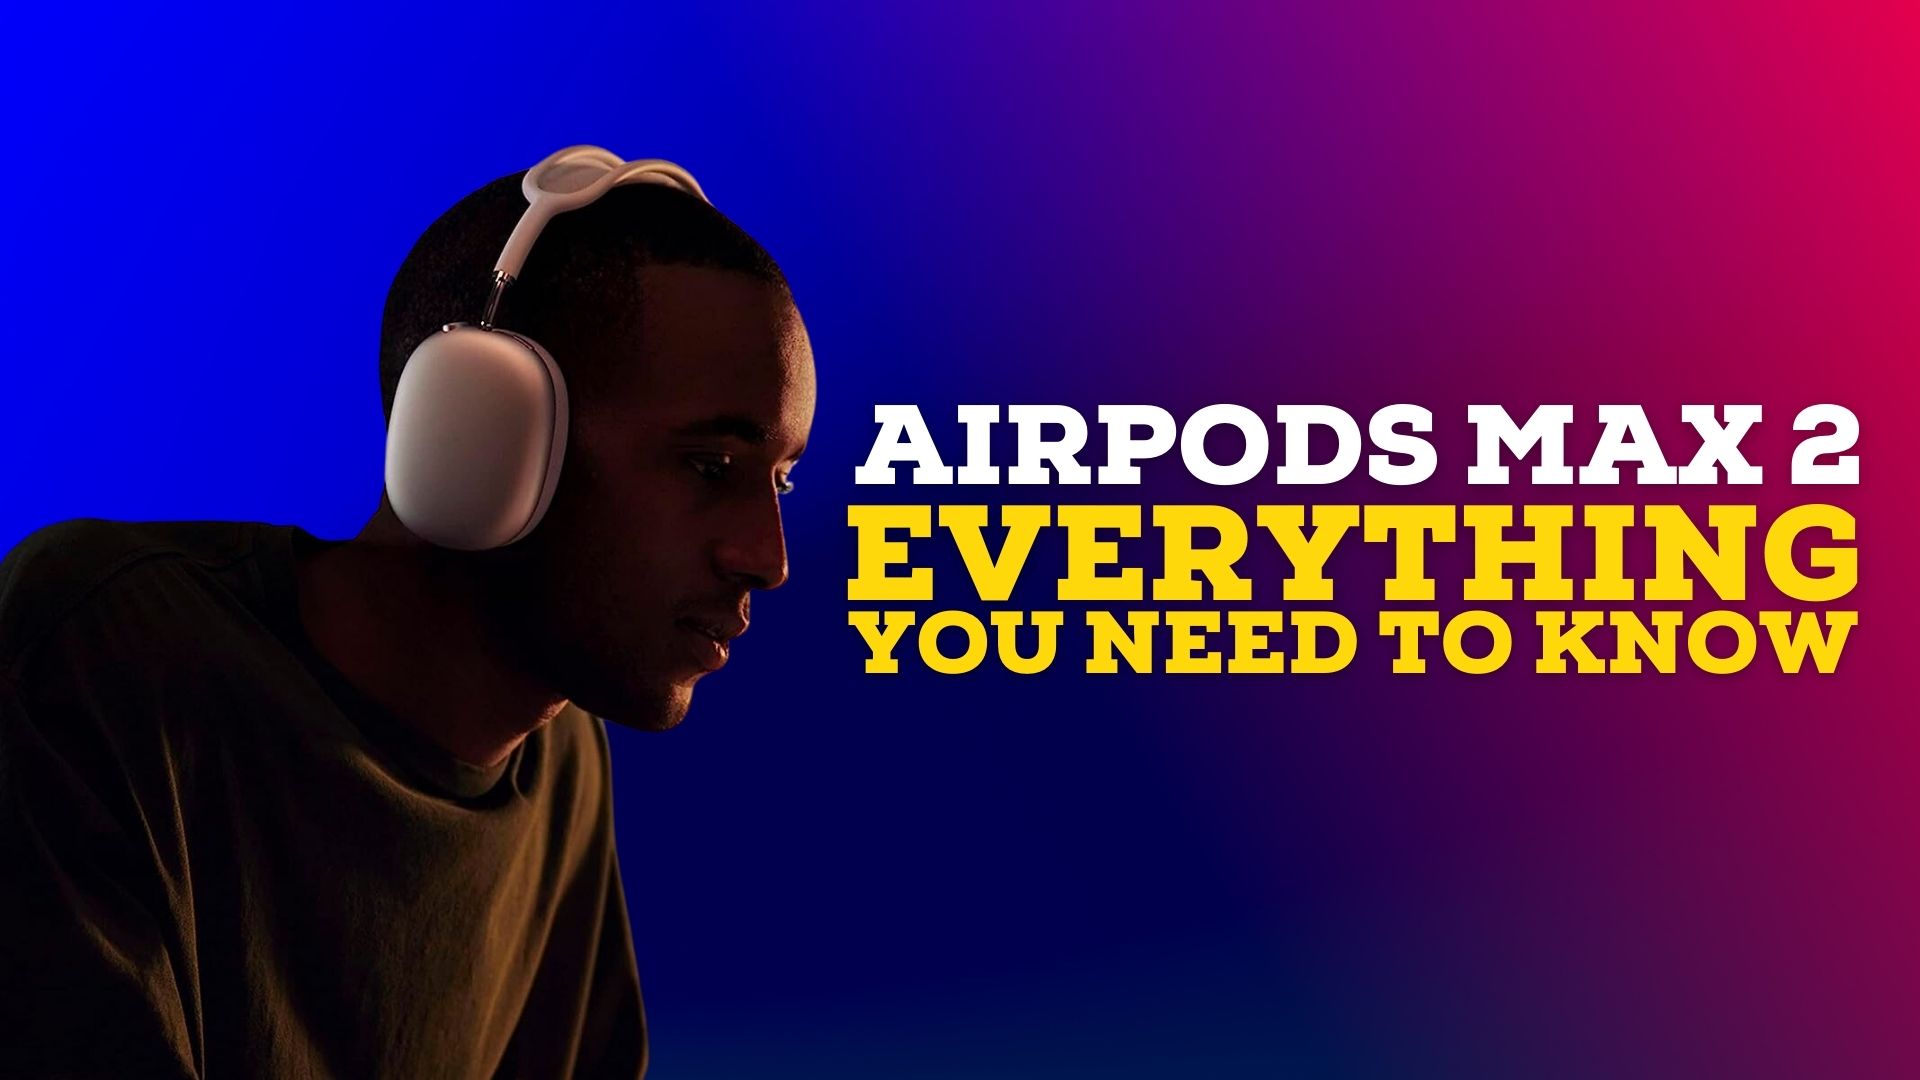 AirPods Max 2 needs to be a major update – with which features?